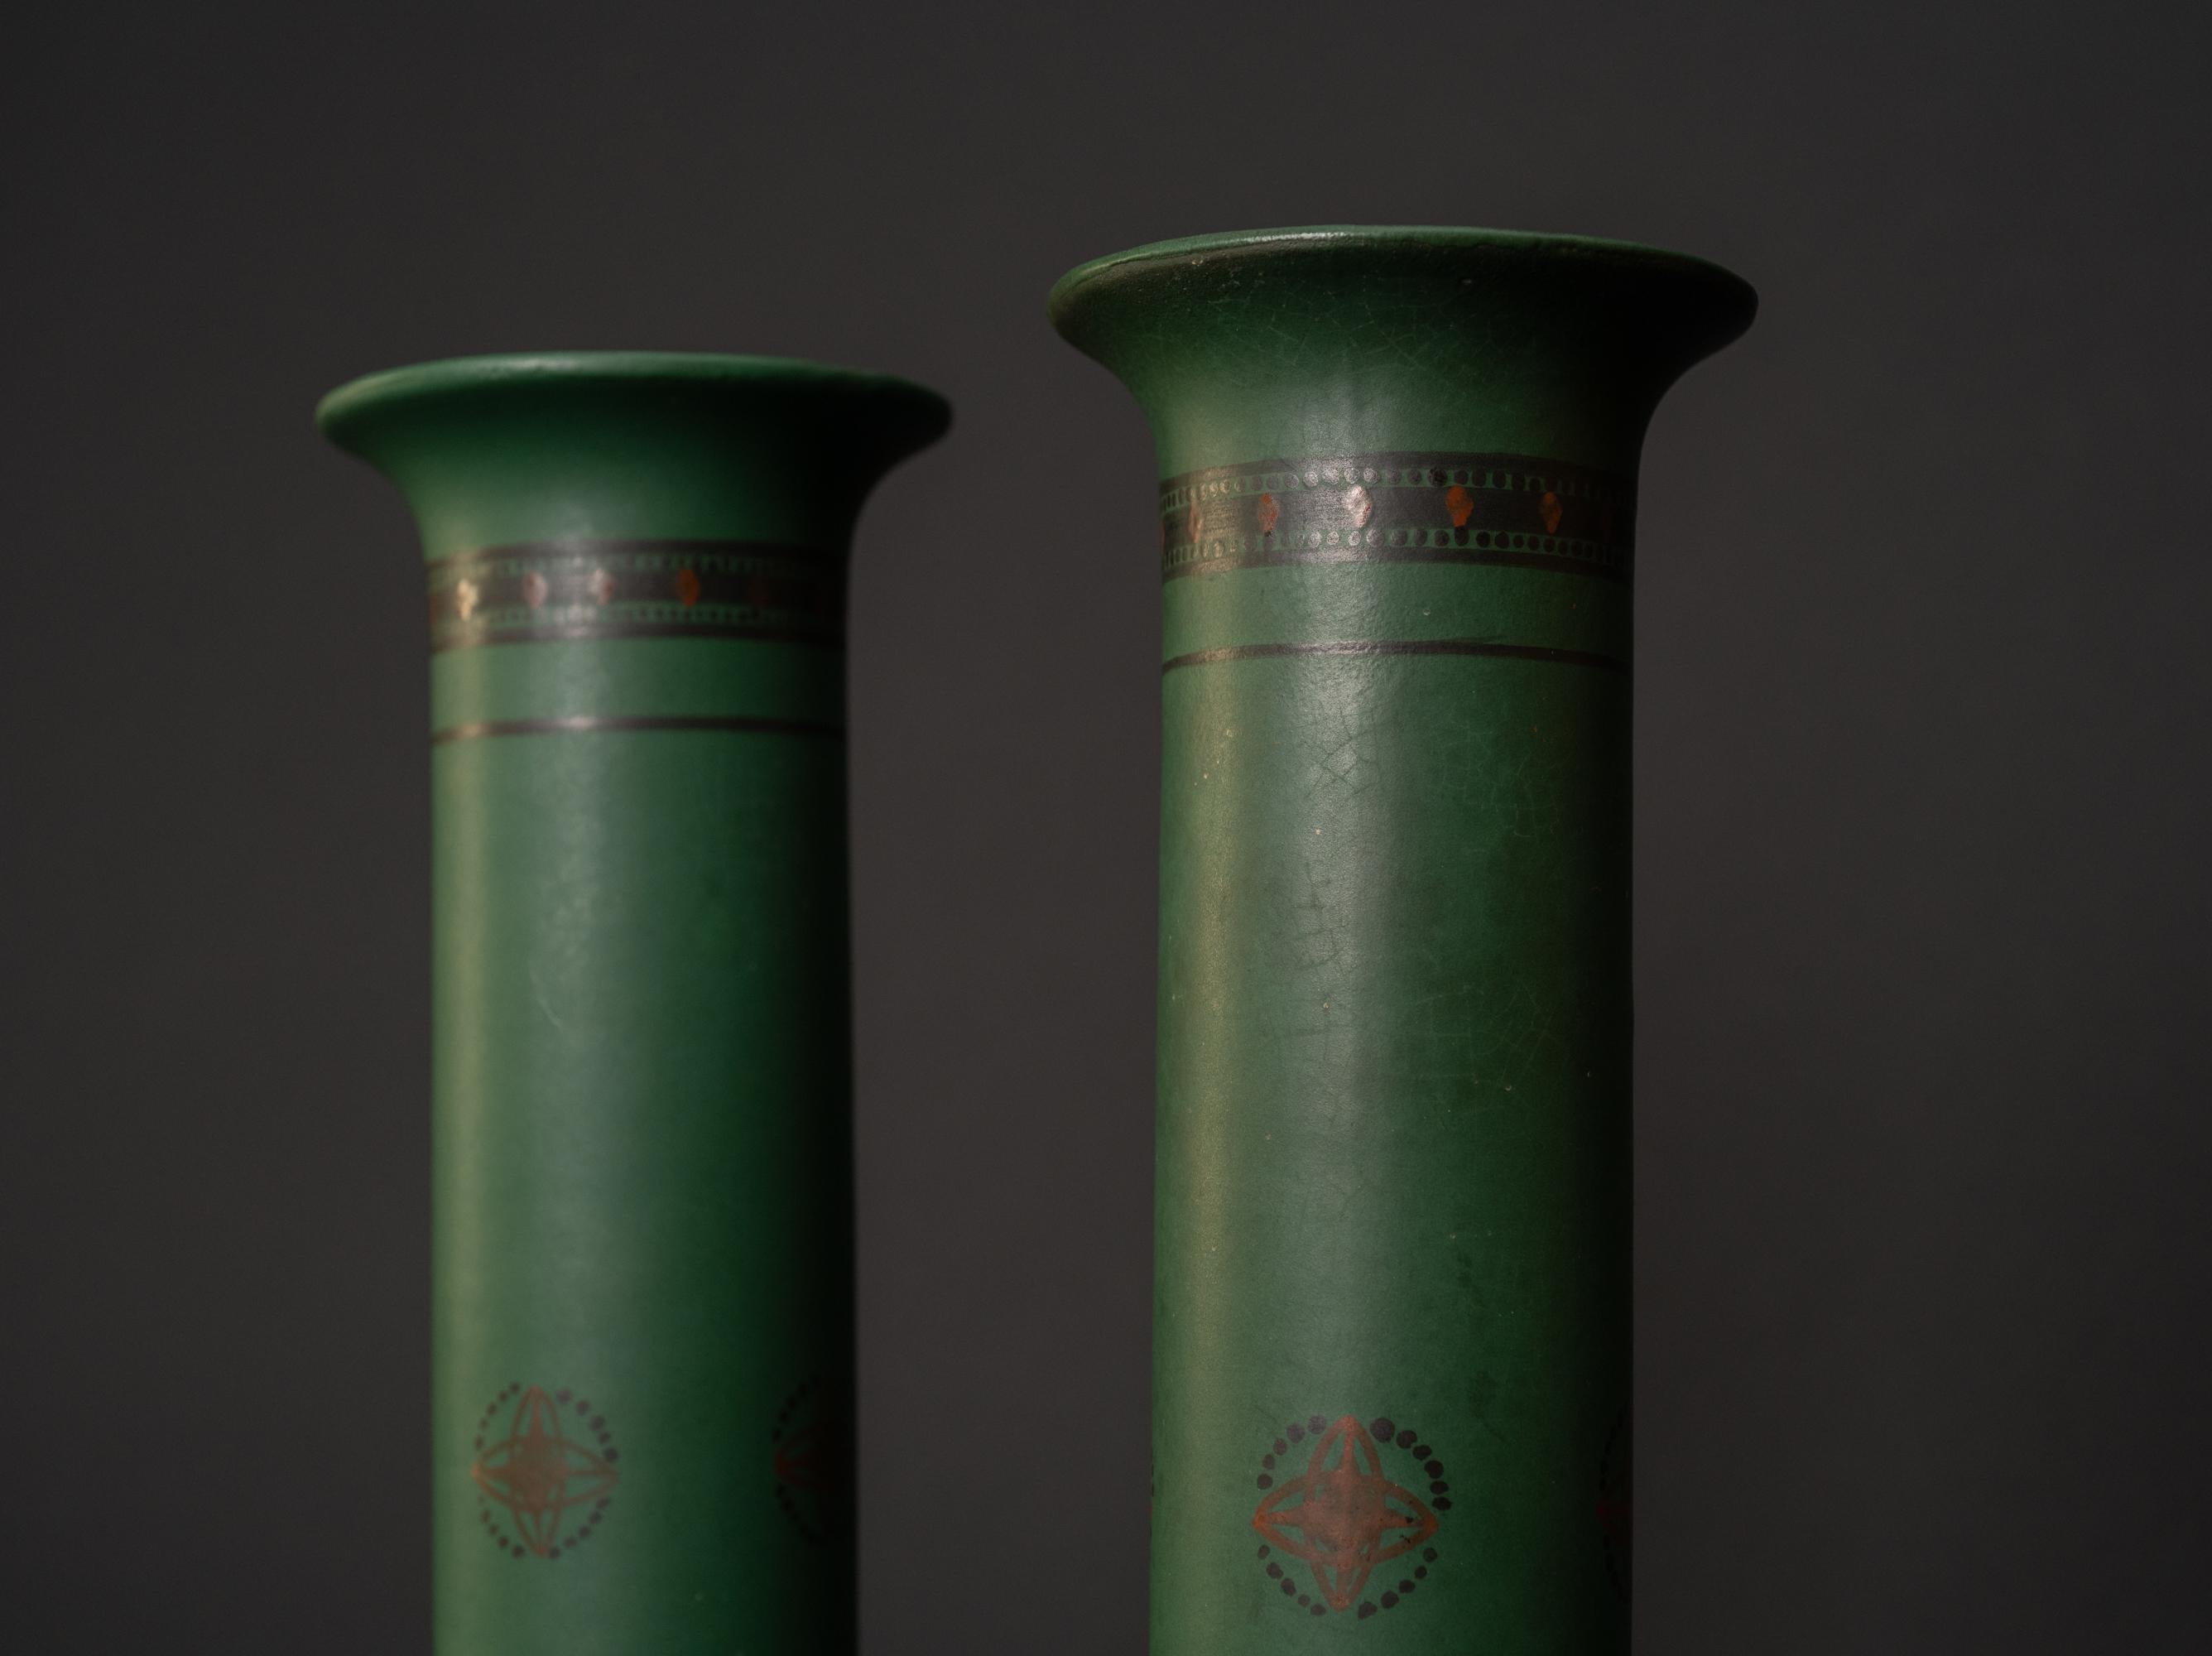 Pair of Green Art Nouveau Vases by Bert Neinhuis for Distel, Amsterdam In Excellent Condition For Sale In Chicago, US